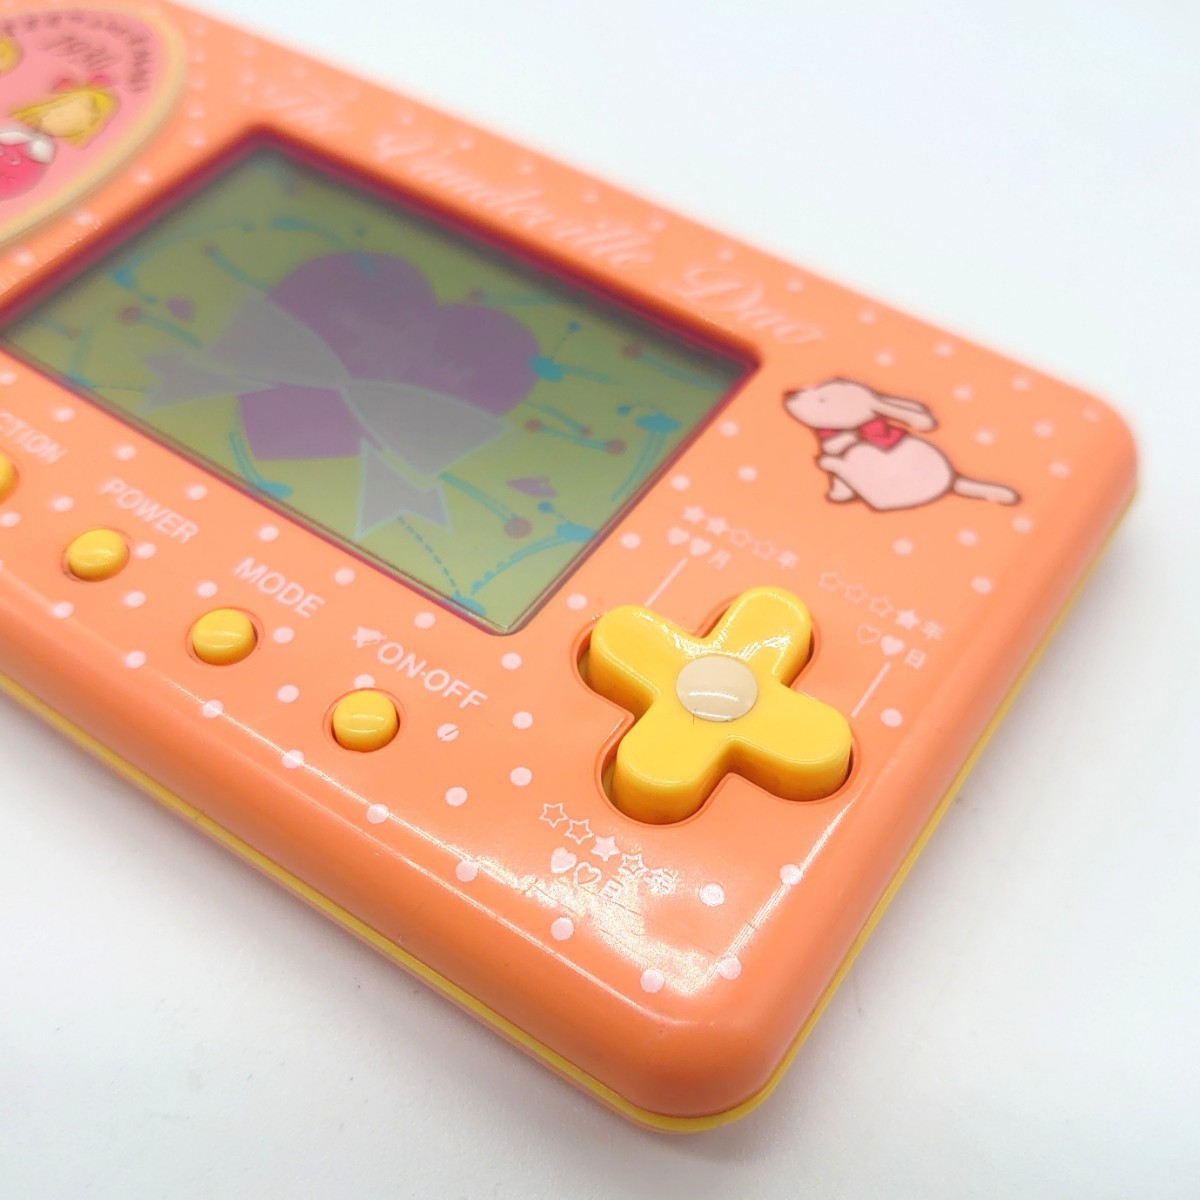 EDDY AND EMMY Eddie &emi-THE VAUDEVILLE DUO Heart mint kis Tommy Sanrio LCD game machine Showa Retro that time thing rare tp-23x880